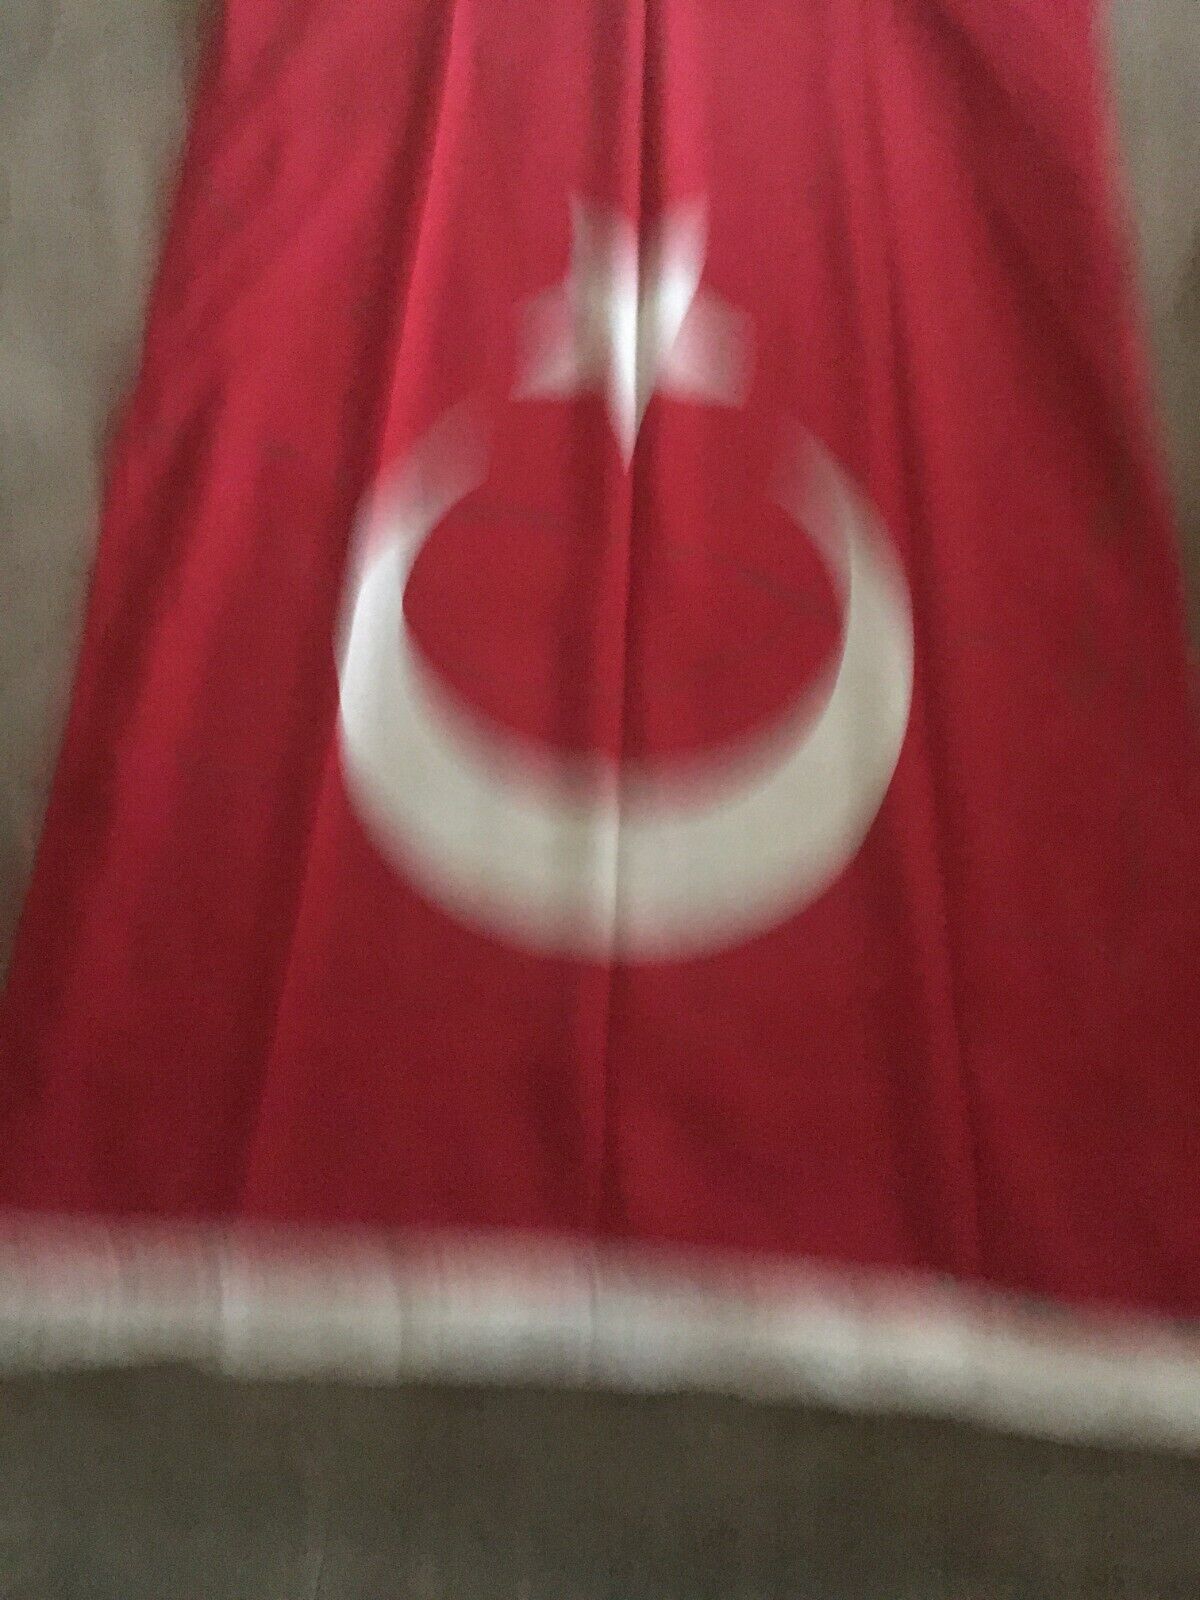 Turkish Turkey National Country Flag 5' x 3' (5FTX3FT) FL012 NEW